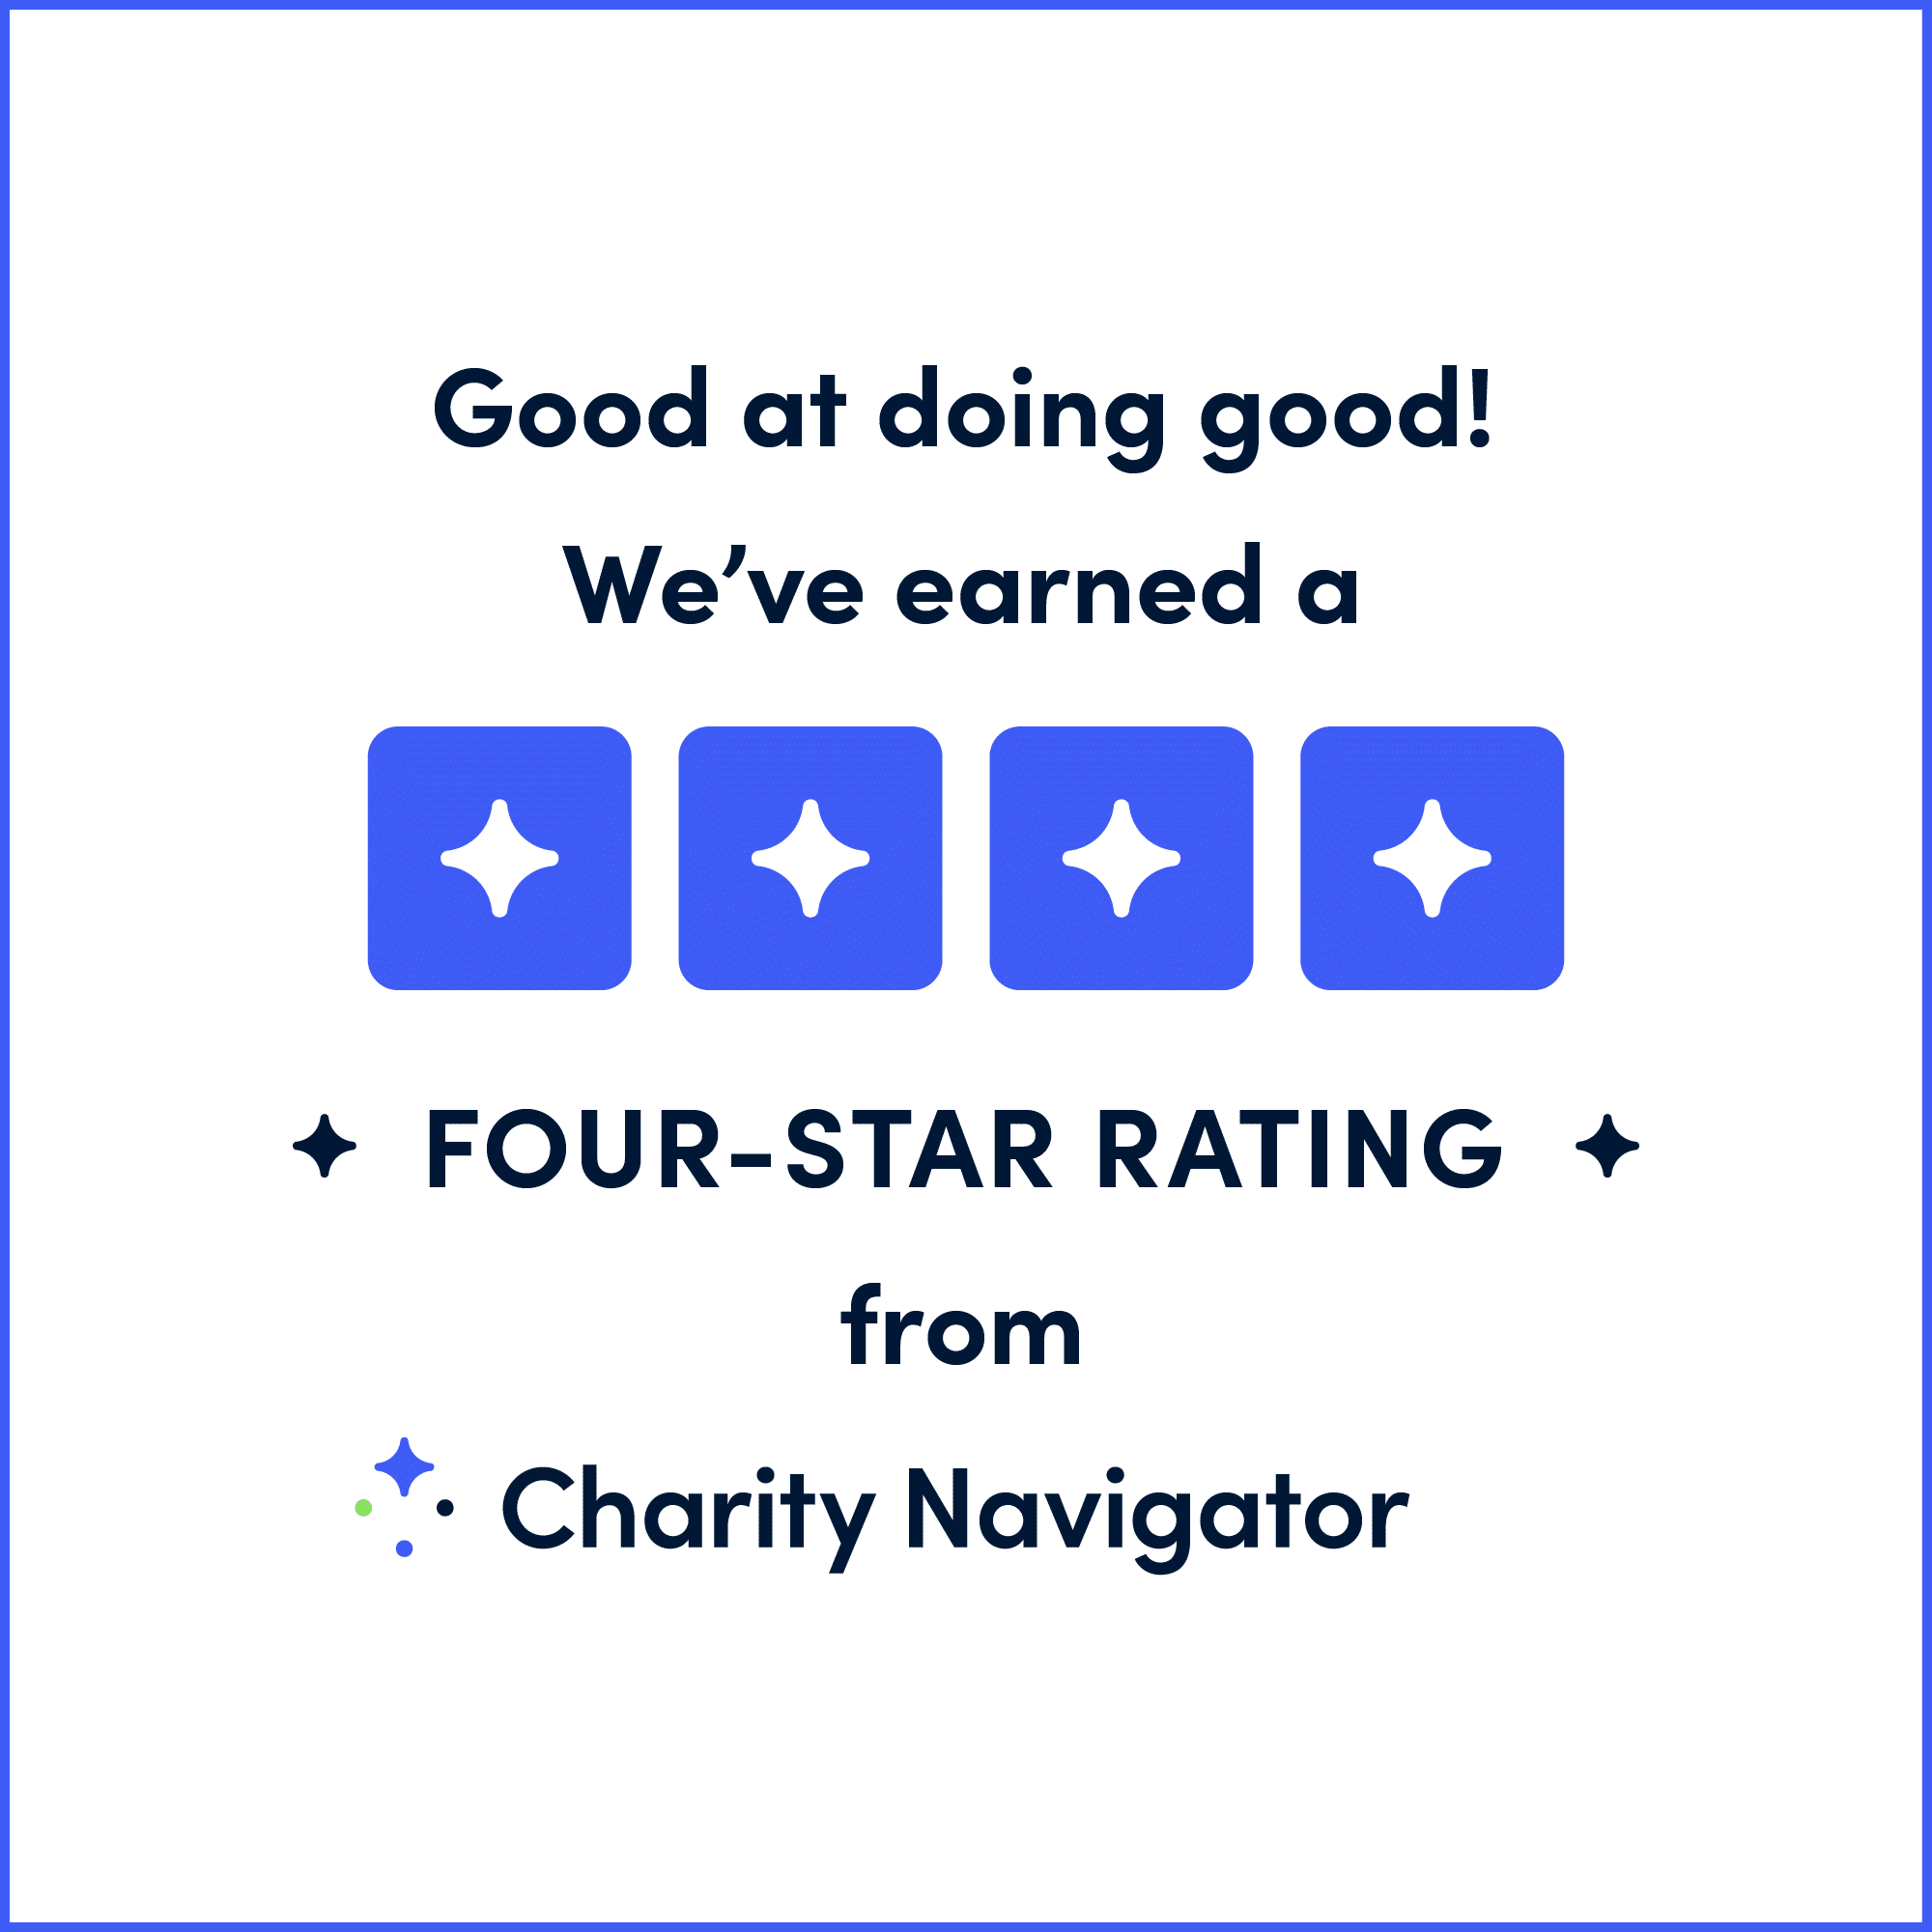 https://als-ny.org/wp-content/uploads/2022/11/Four-Star-Rating-Social-Good.png